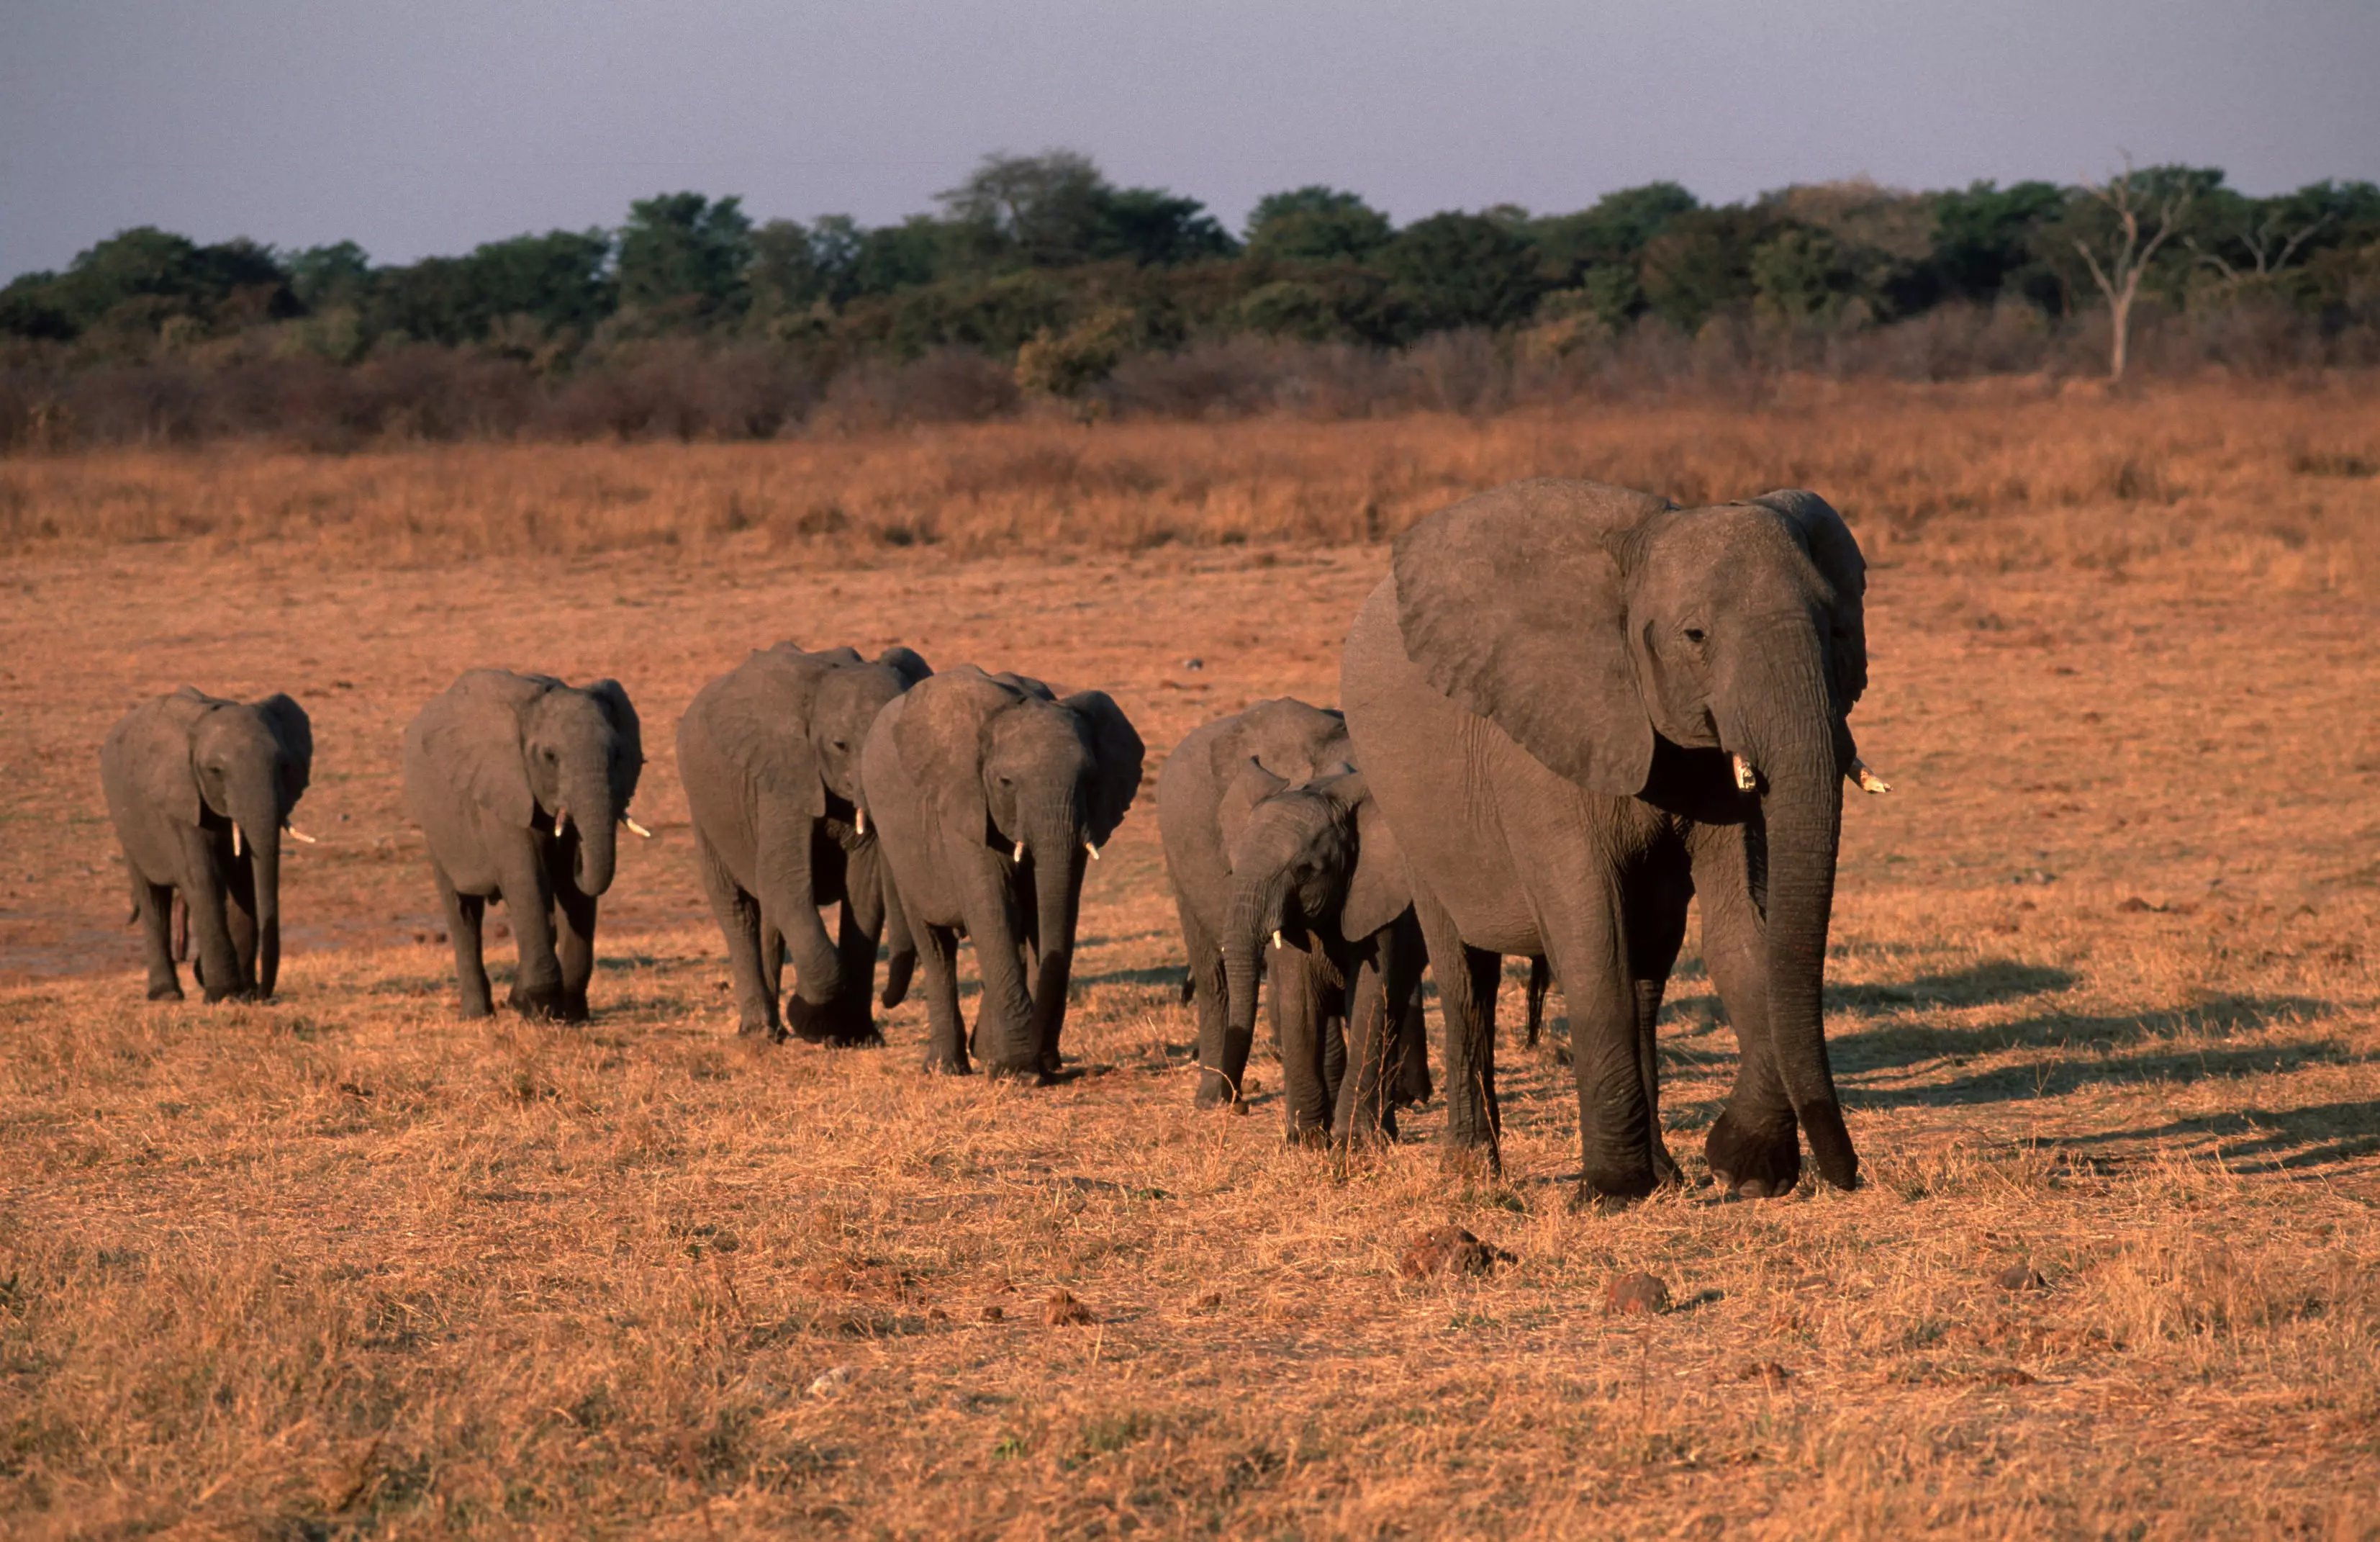 The elephants have died due to lack of water and overcrowding (